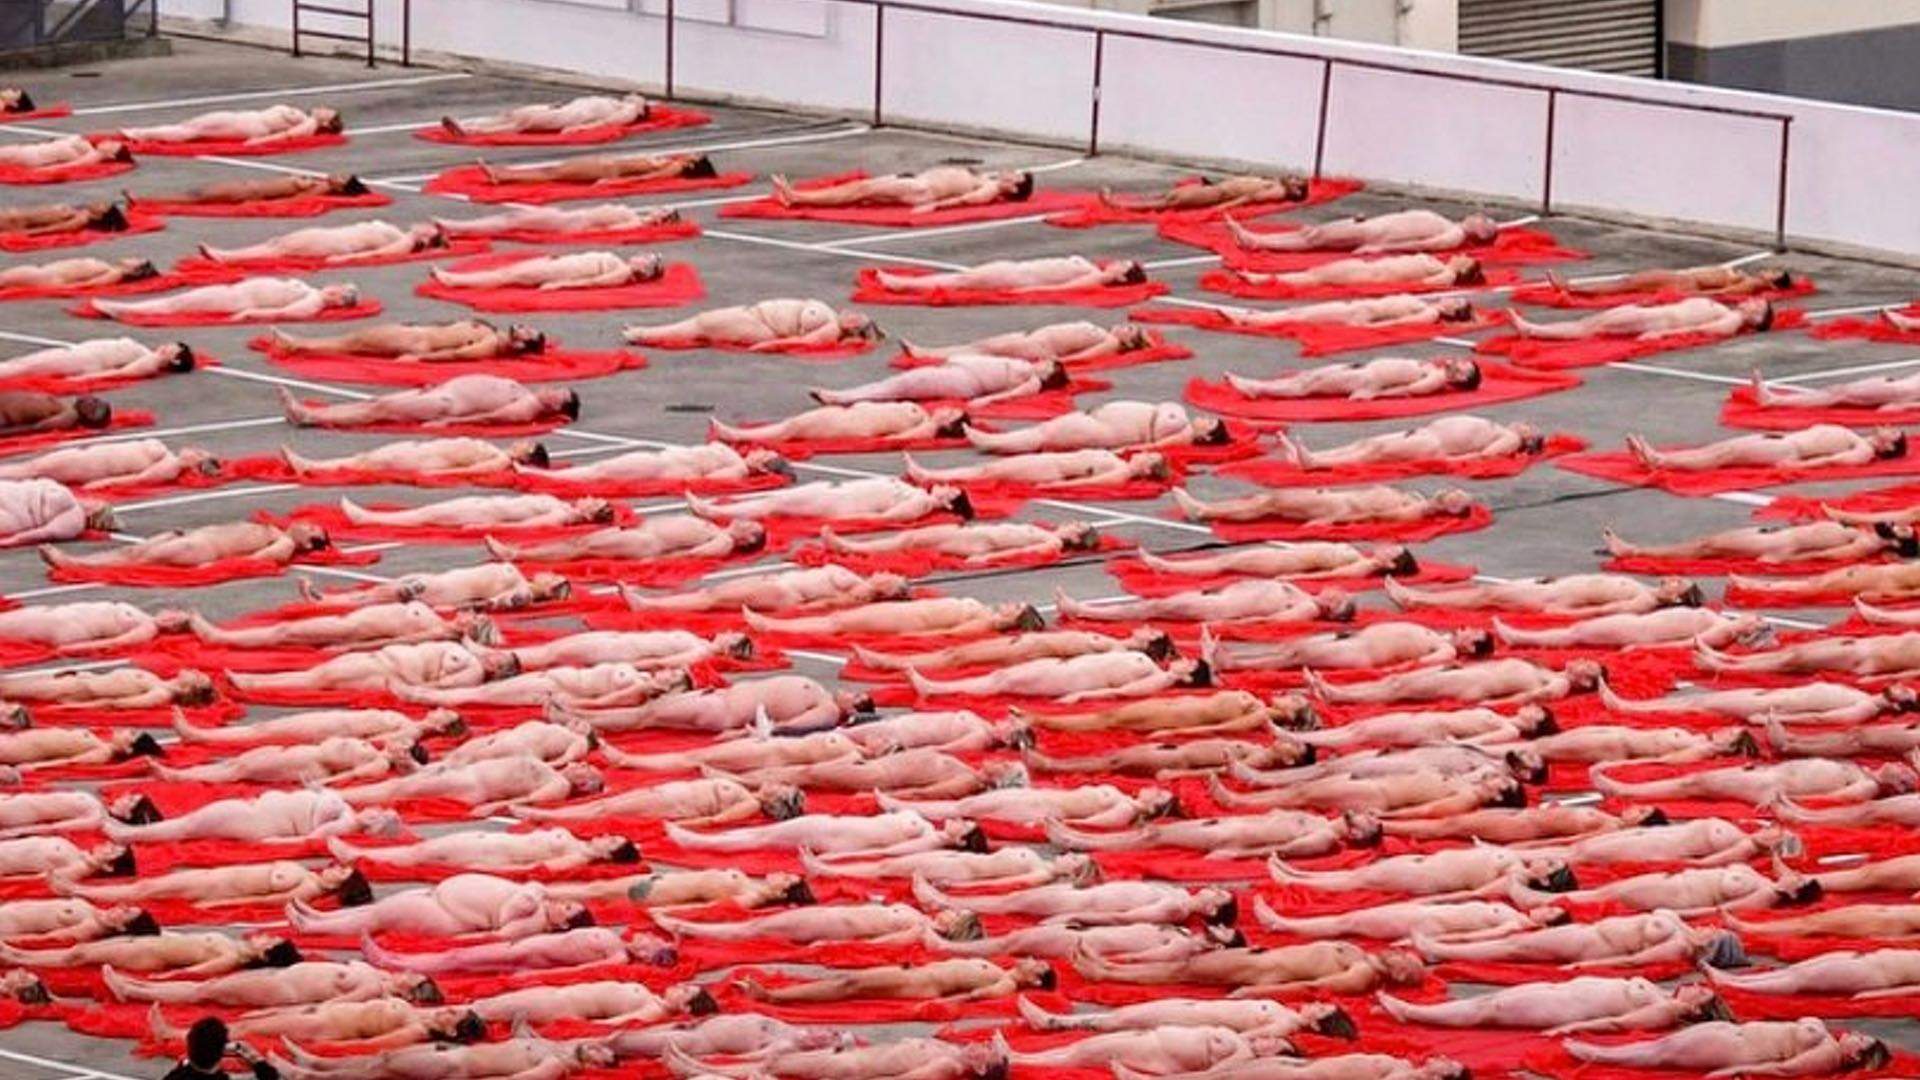 Artist Spencer Tunick Staged a Mass Nude Work on a Melbourne Rooftop This Morning